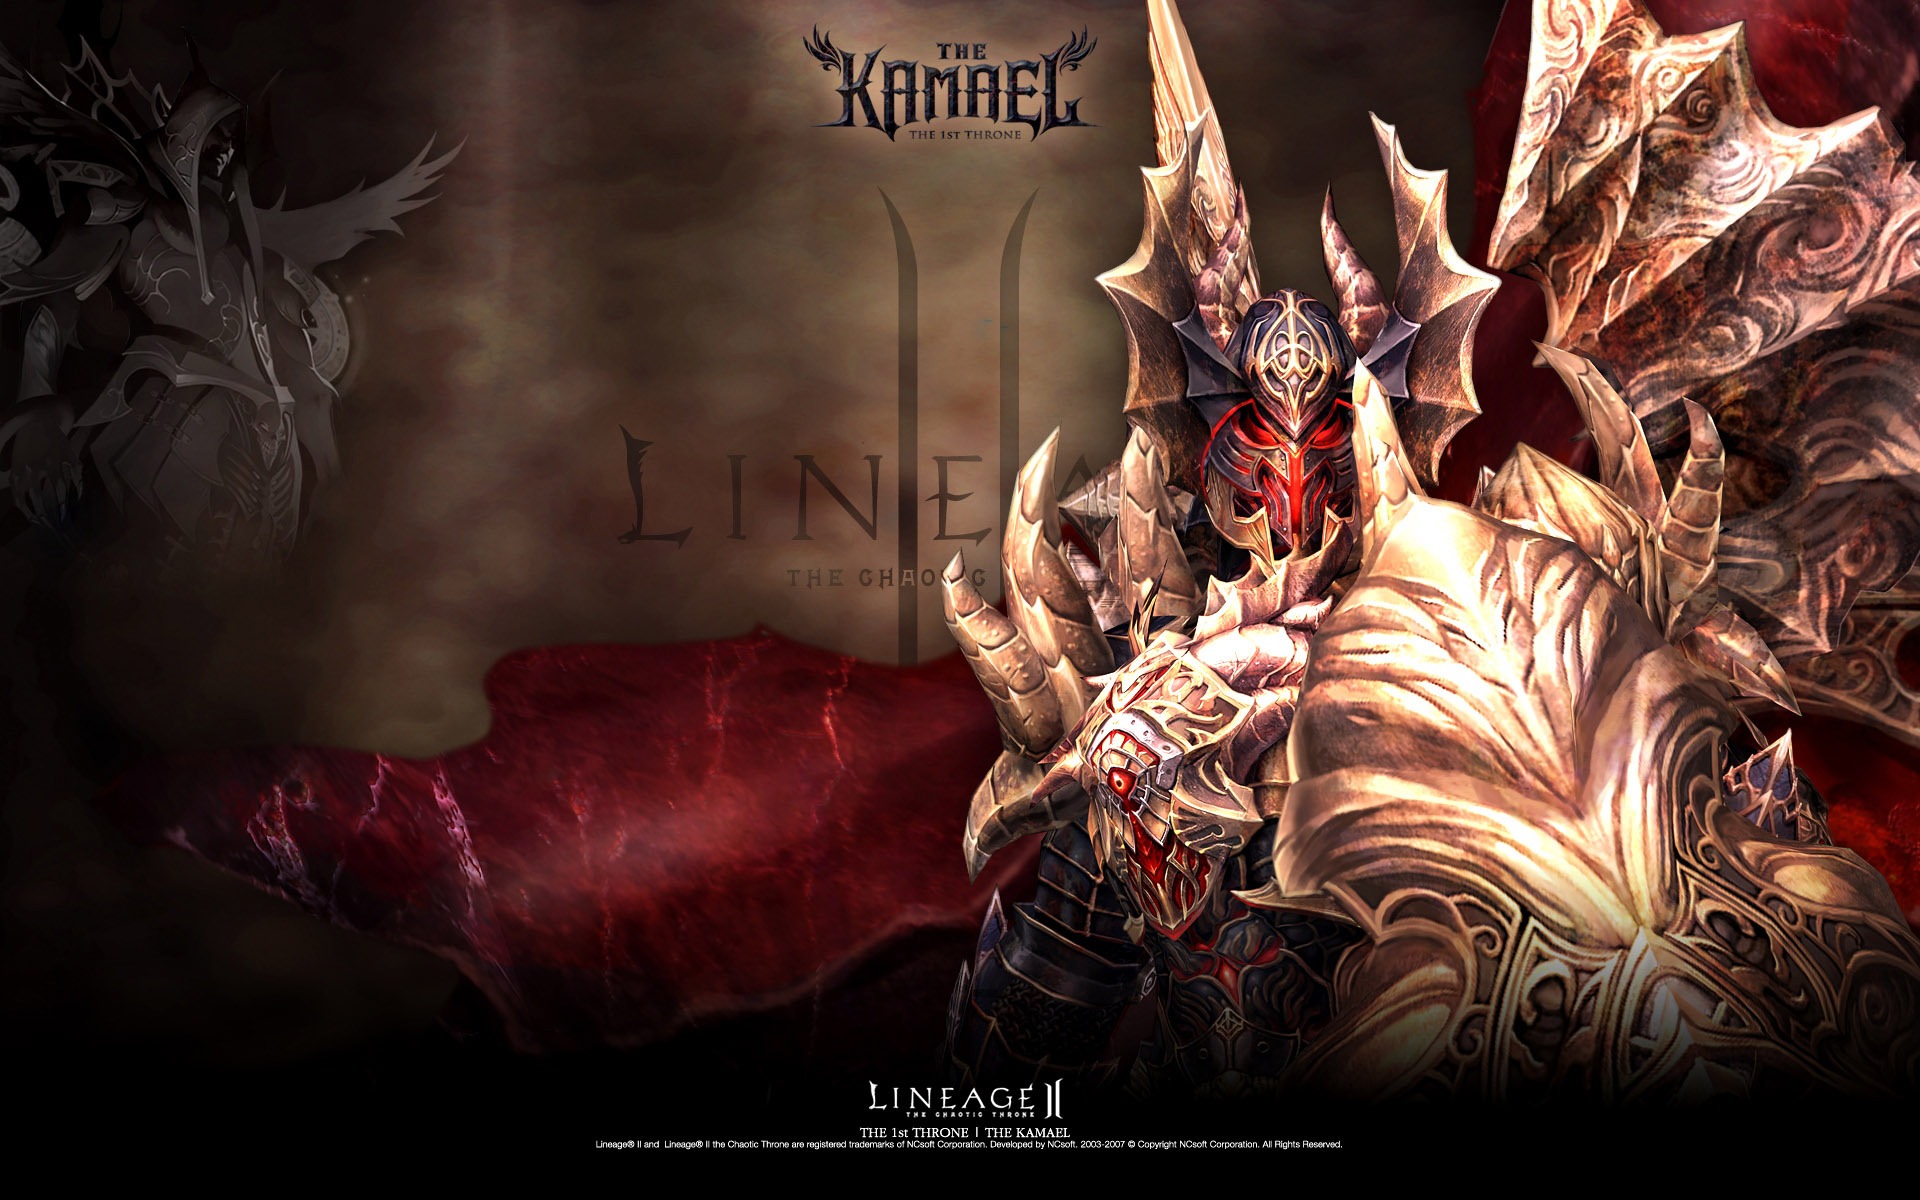 LINEAGE Ⅱ modeling HD gaming wallpapers #11 - 1920x1200